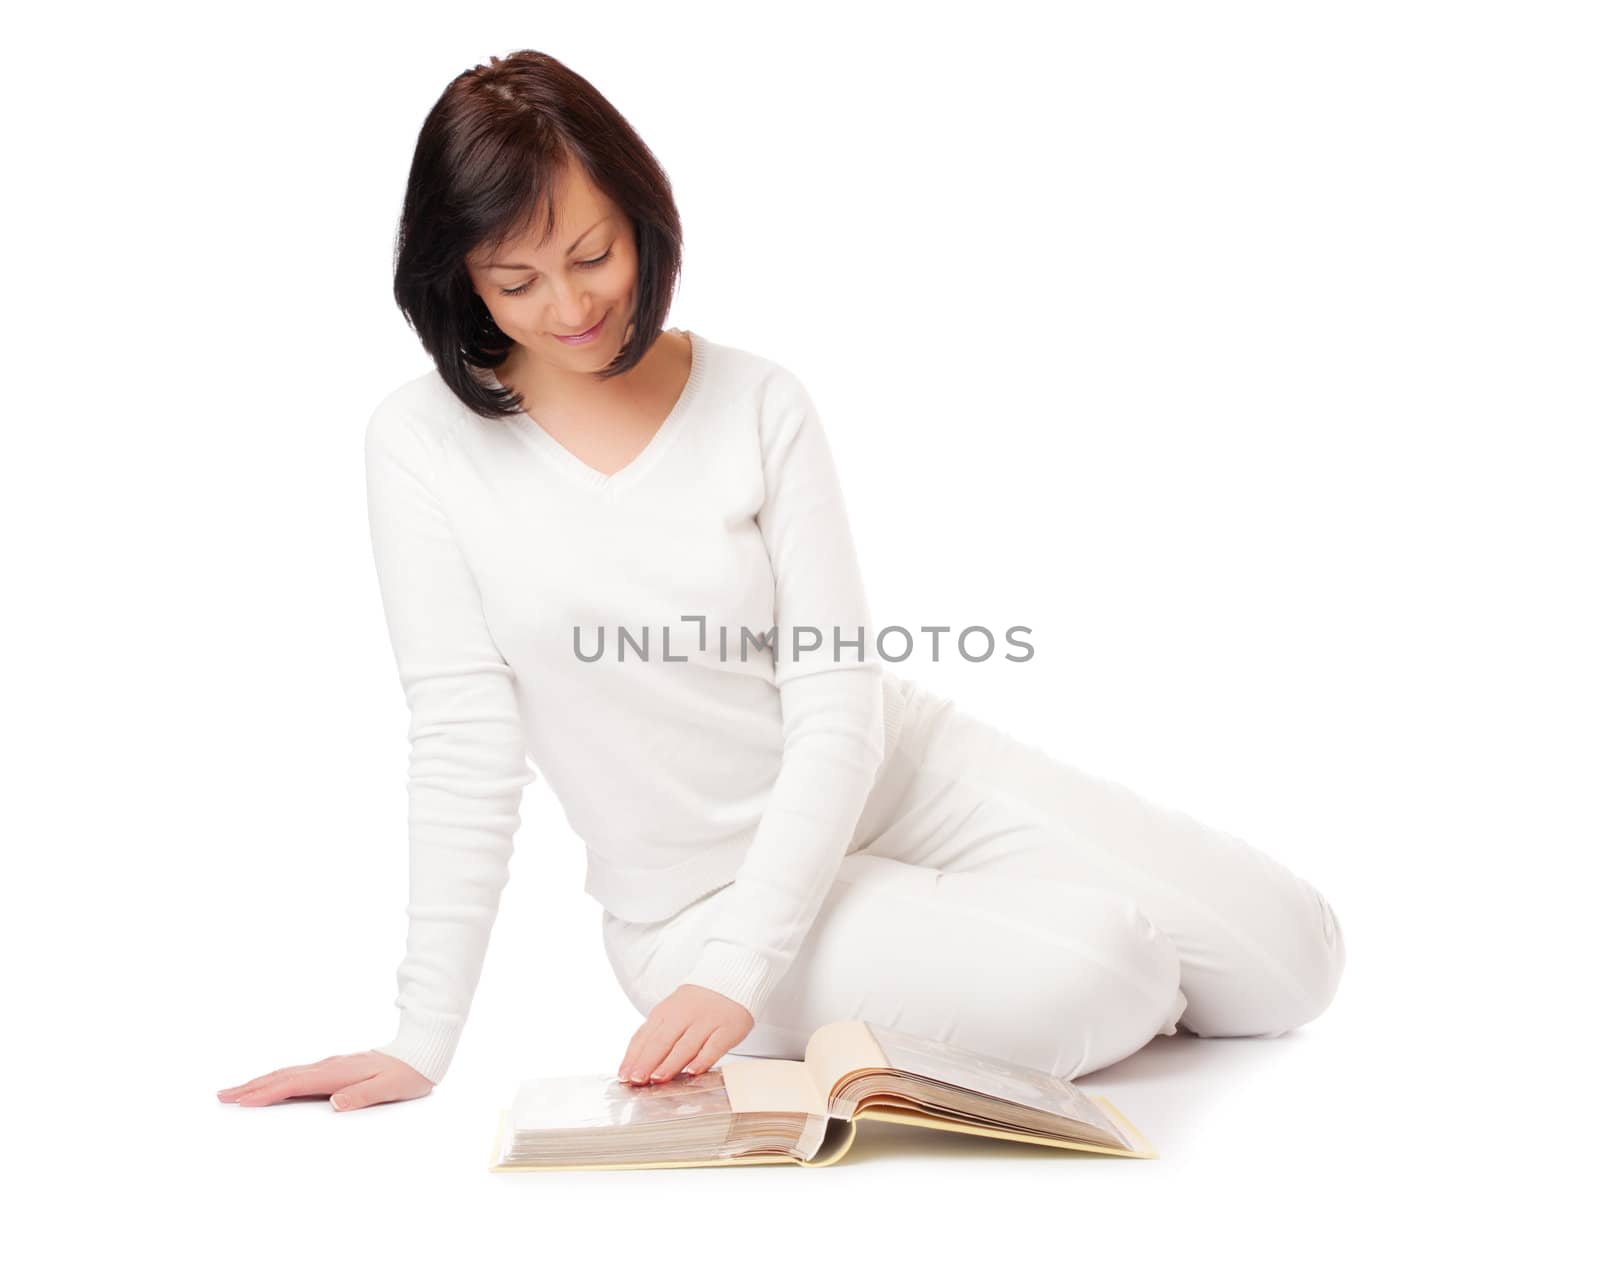 Young smiling woman looking album isolated